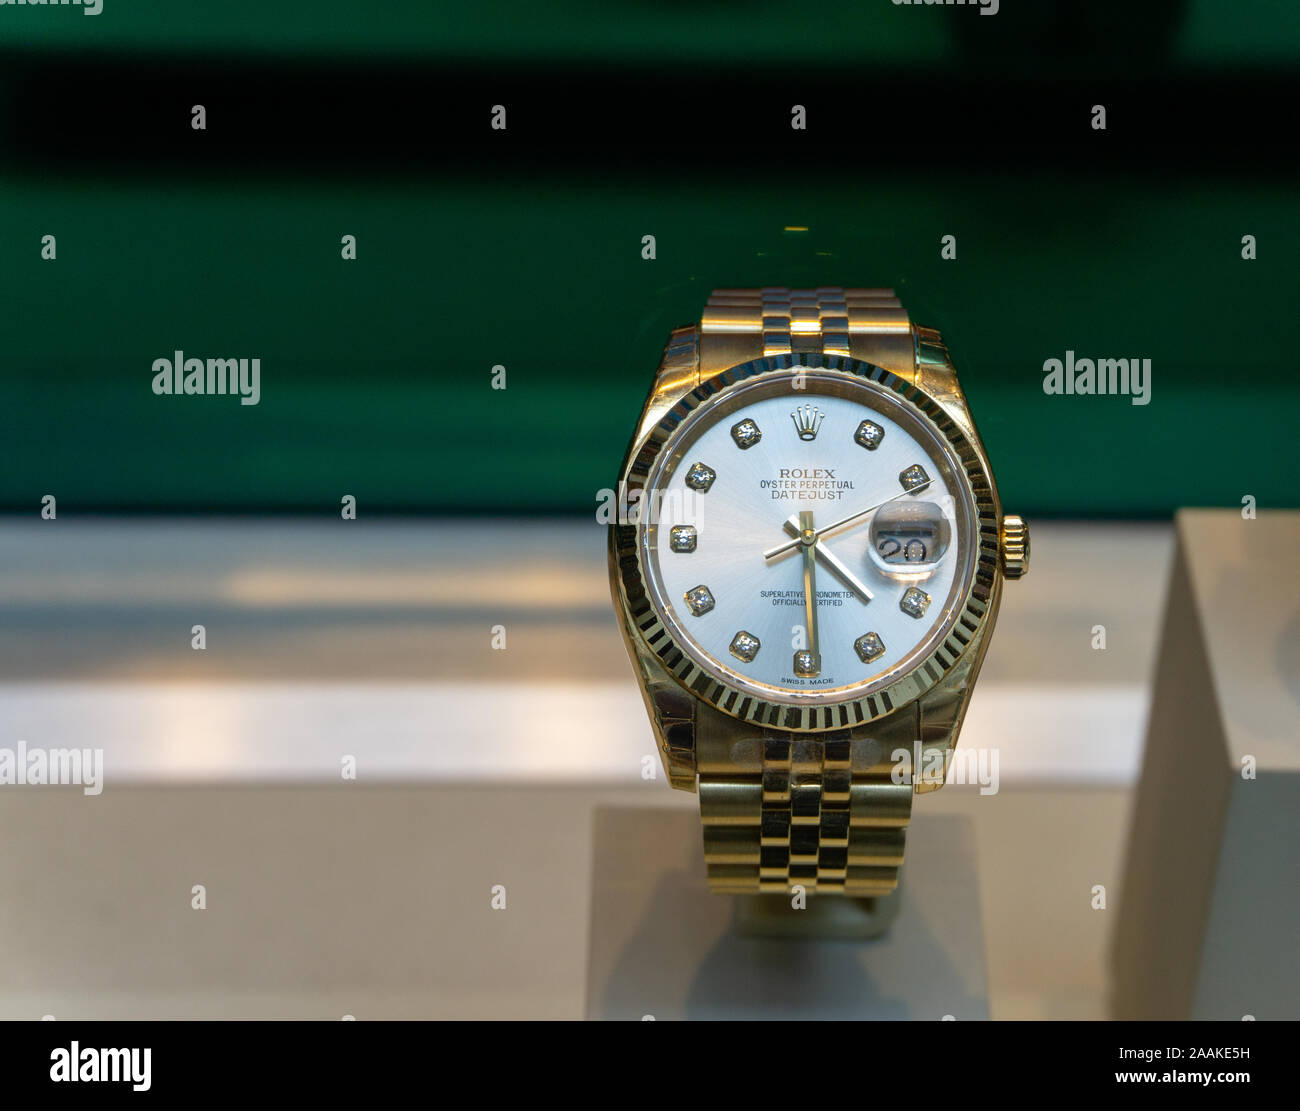 NEW YORK, USA - AUGUST 20, 2018: Rolex Luxury Watches For Sale In Shop  Window Display Stock Photo - Alamy